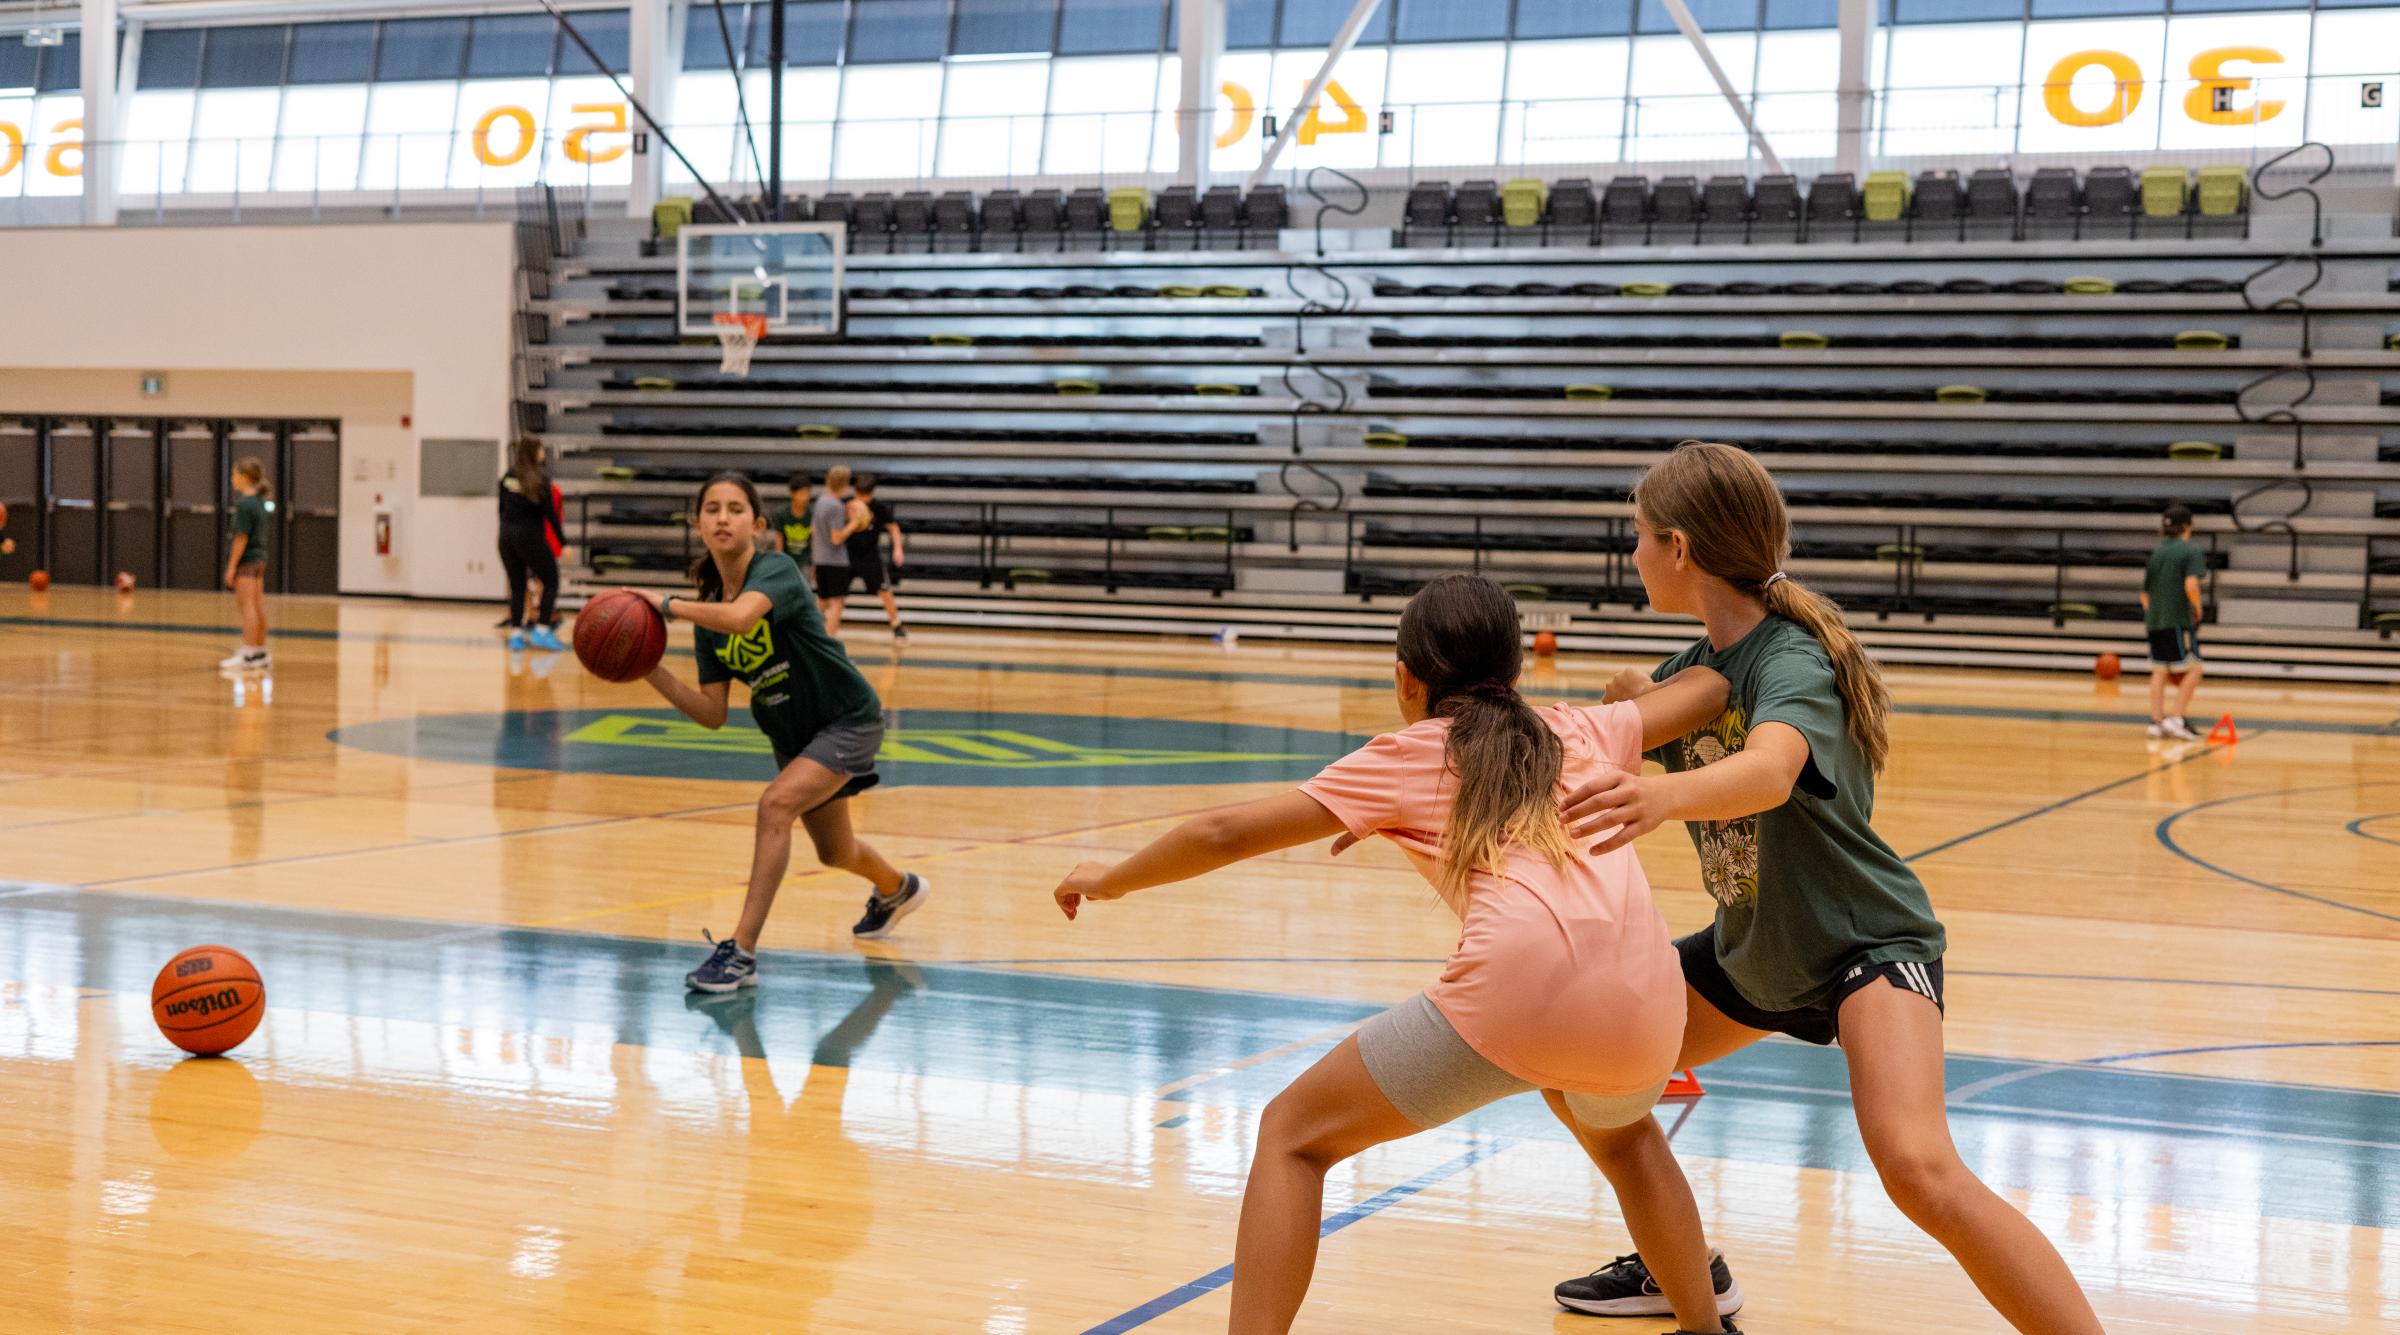 An action shot of a girl in a gymnasium passing a basketball to a teammate who is being guarded by another girl